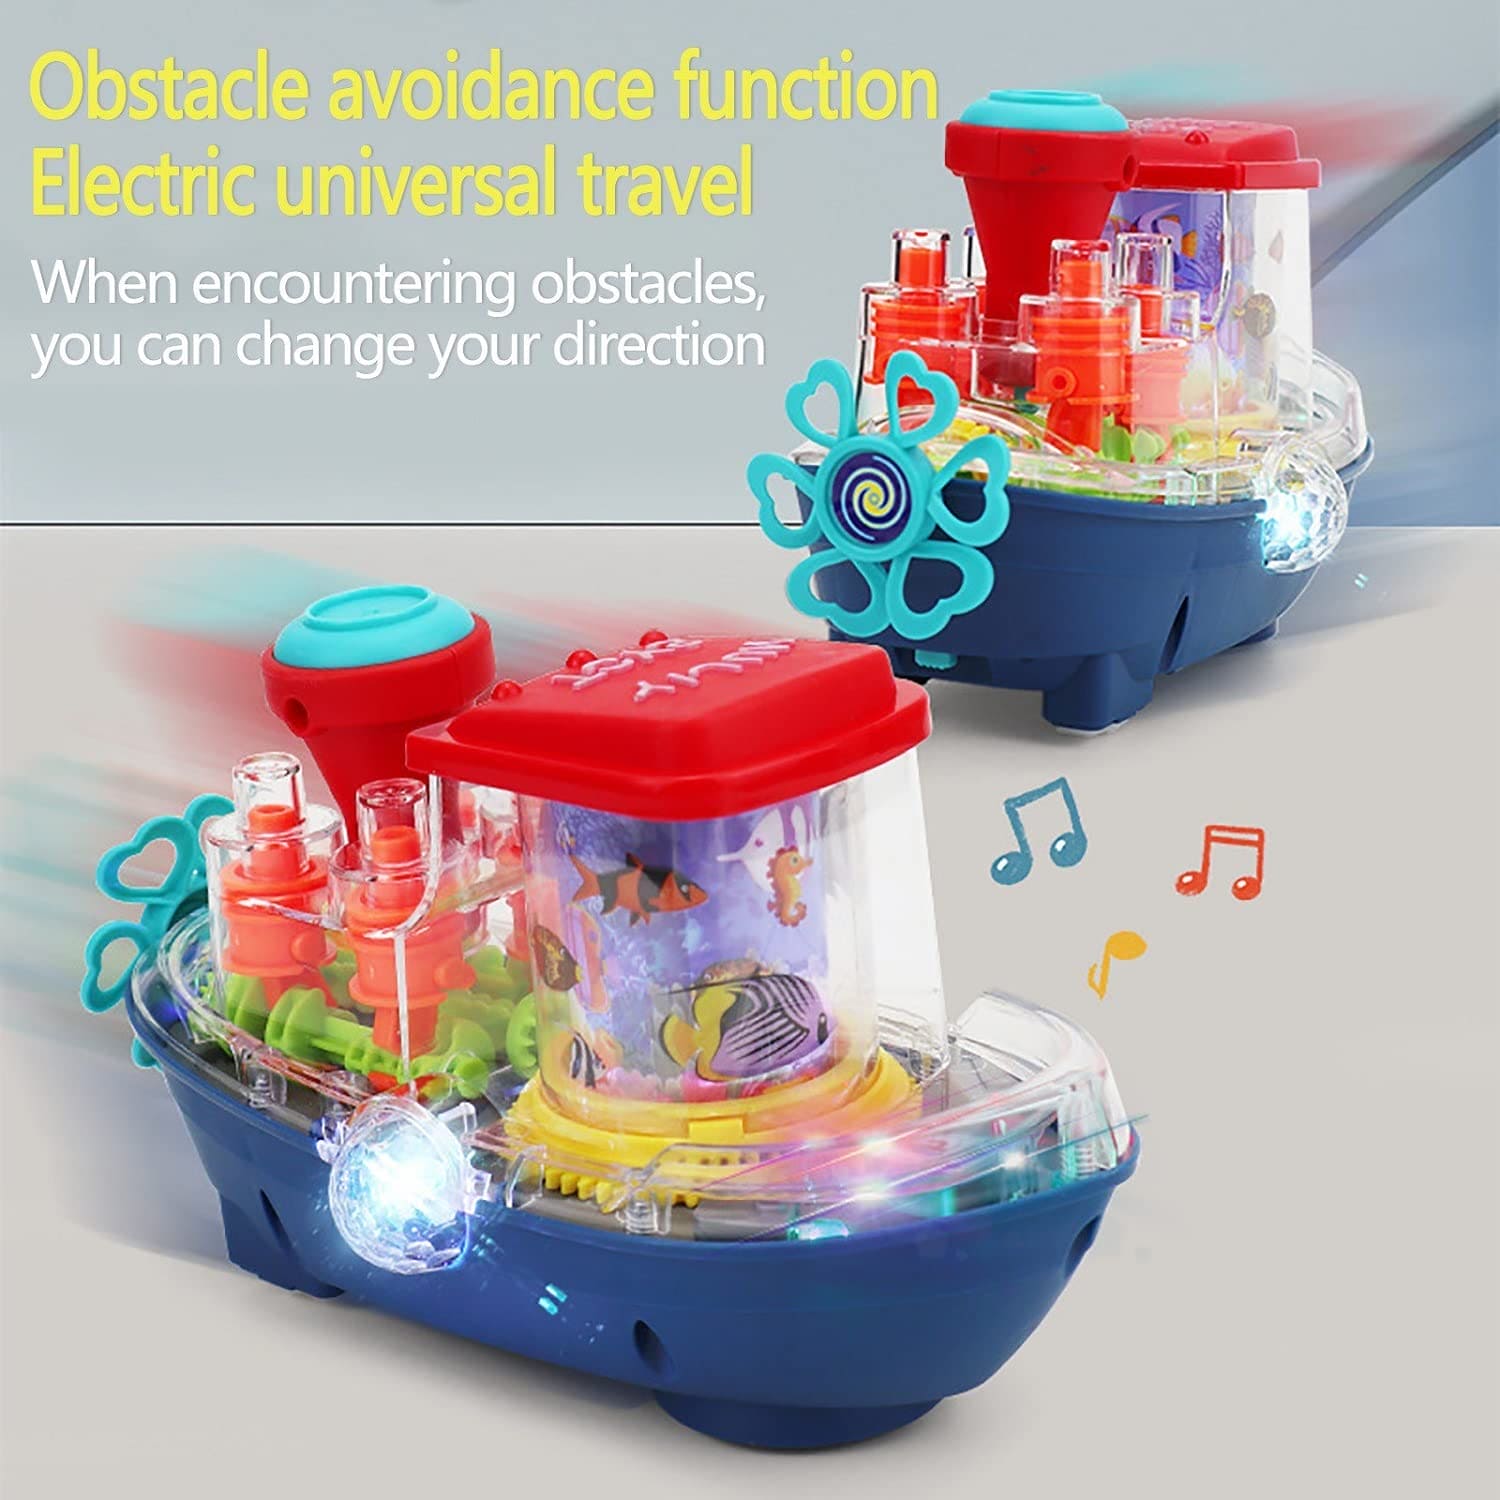 Gear Land Ship, Musical Toy Boat with Colorful Light, Transparent Rotatable Concept Boat, Underwater World Cruise Ship Toy For Kid, Battery Operated Toy Boat with Rotating Fishing Lamp Toy, Children's Toy Boat